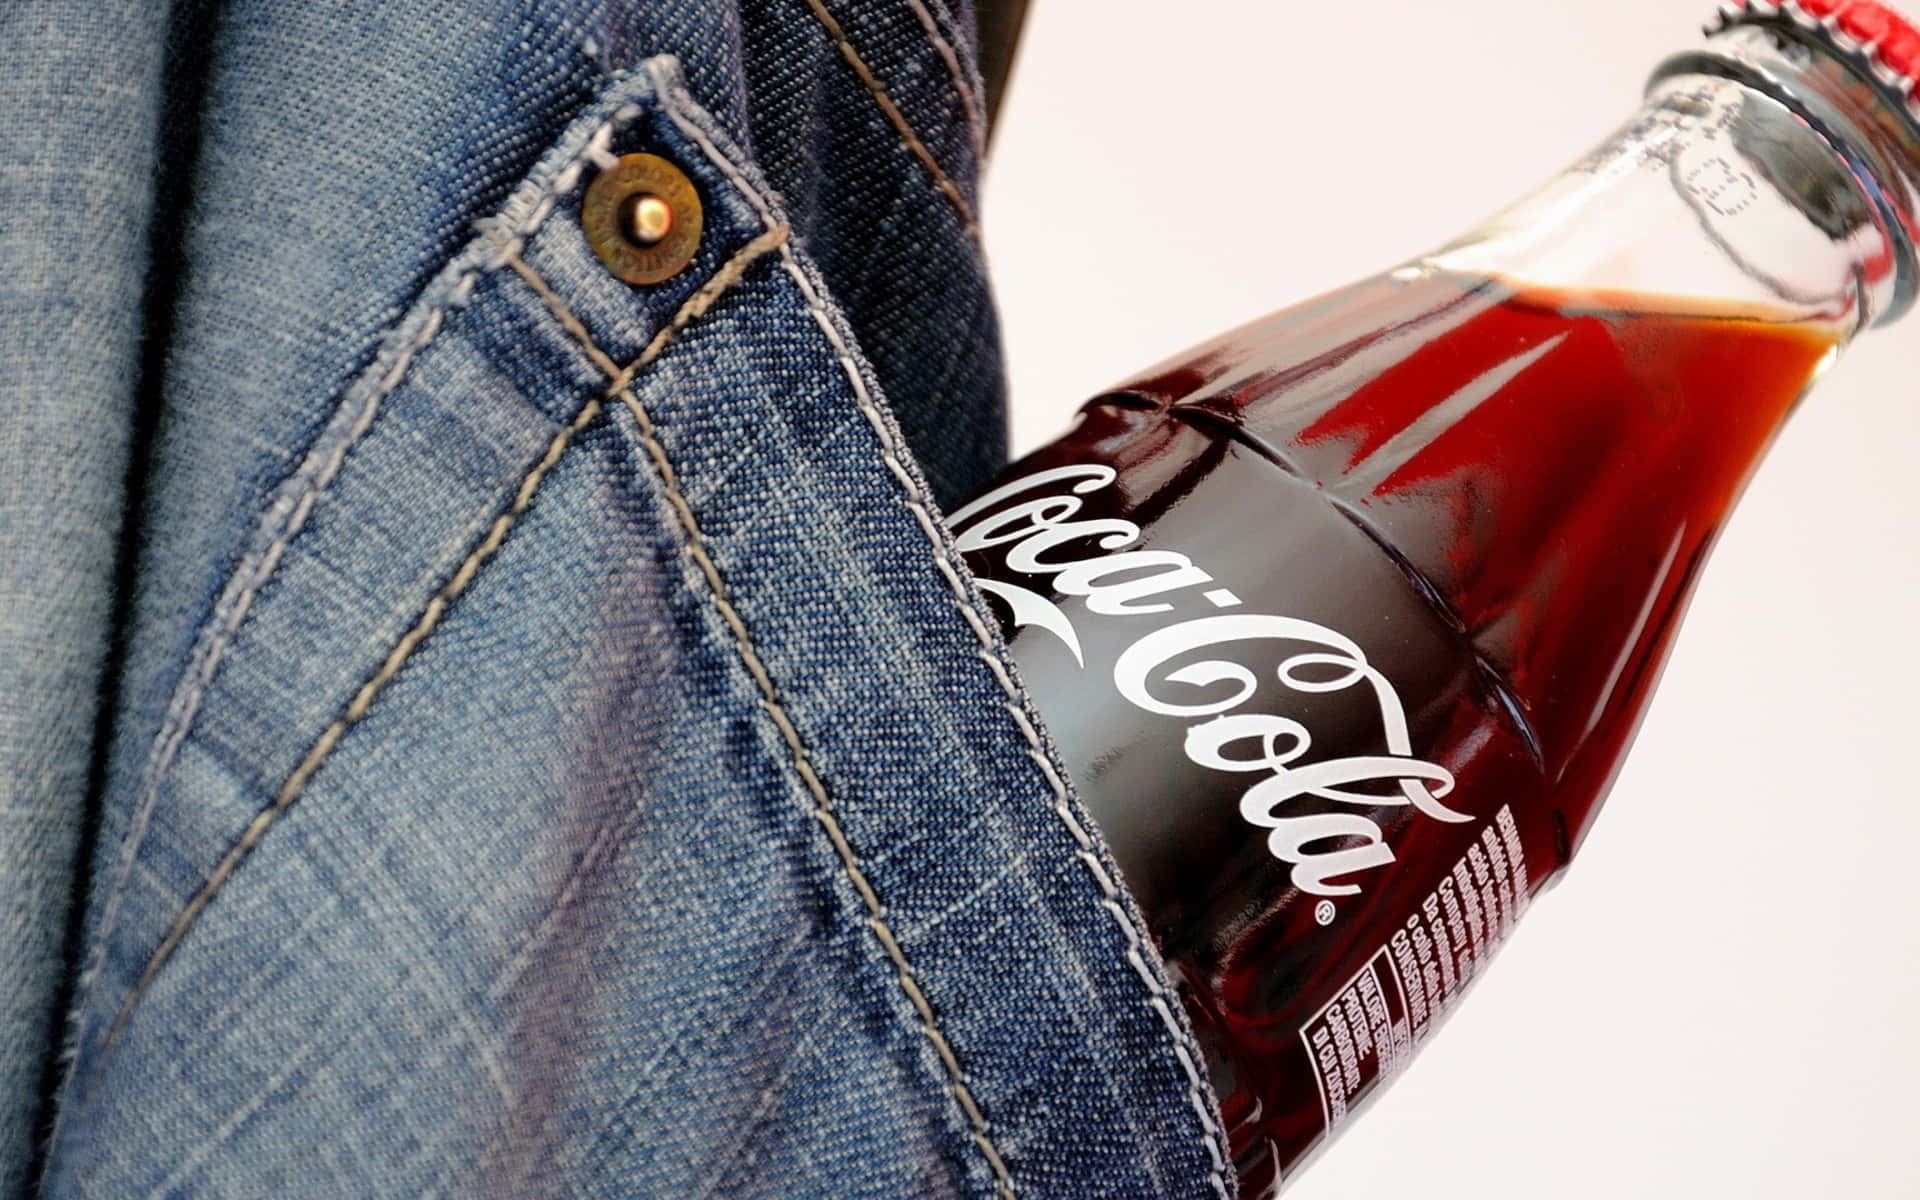 A Coca Cola Bottle In A Pocket Of Jeans